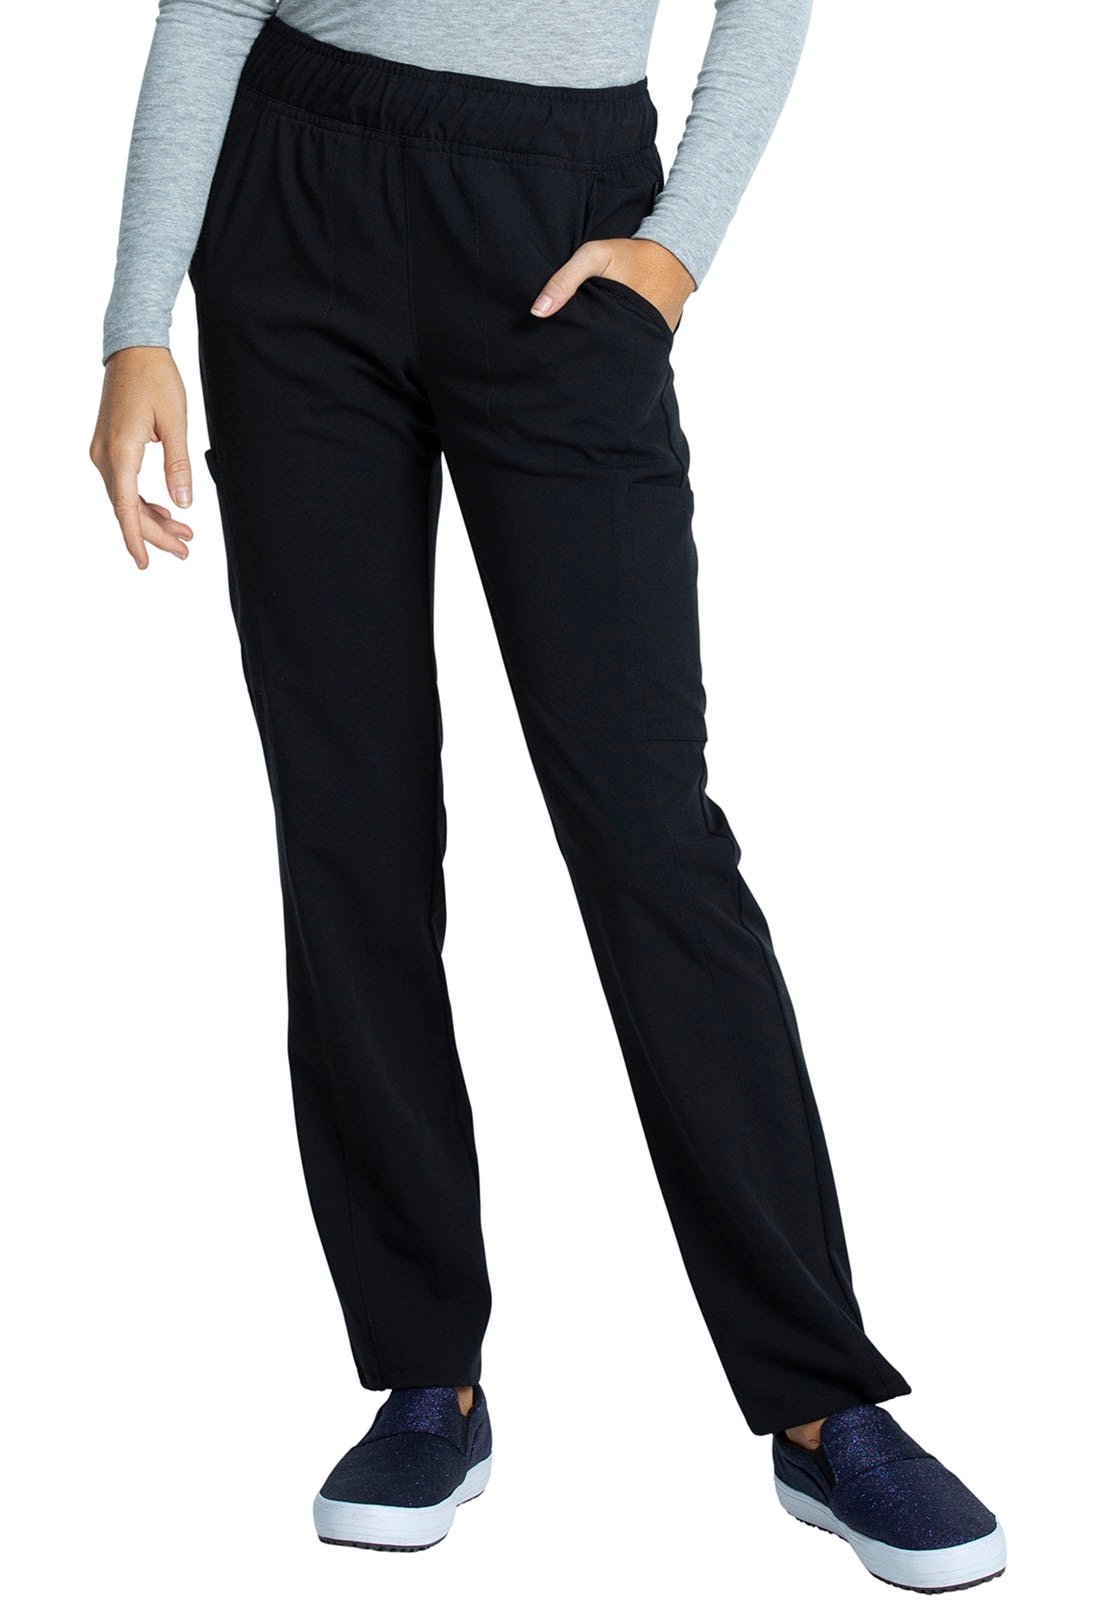 Vince Camuto Mid Rise Pull-on Pant VC100T | Medical Scrubs Collection